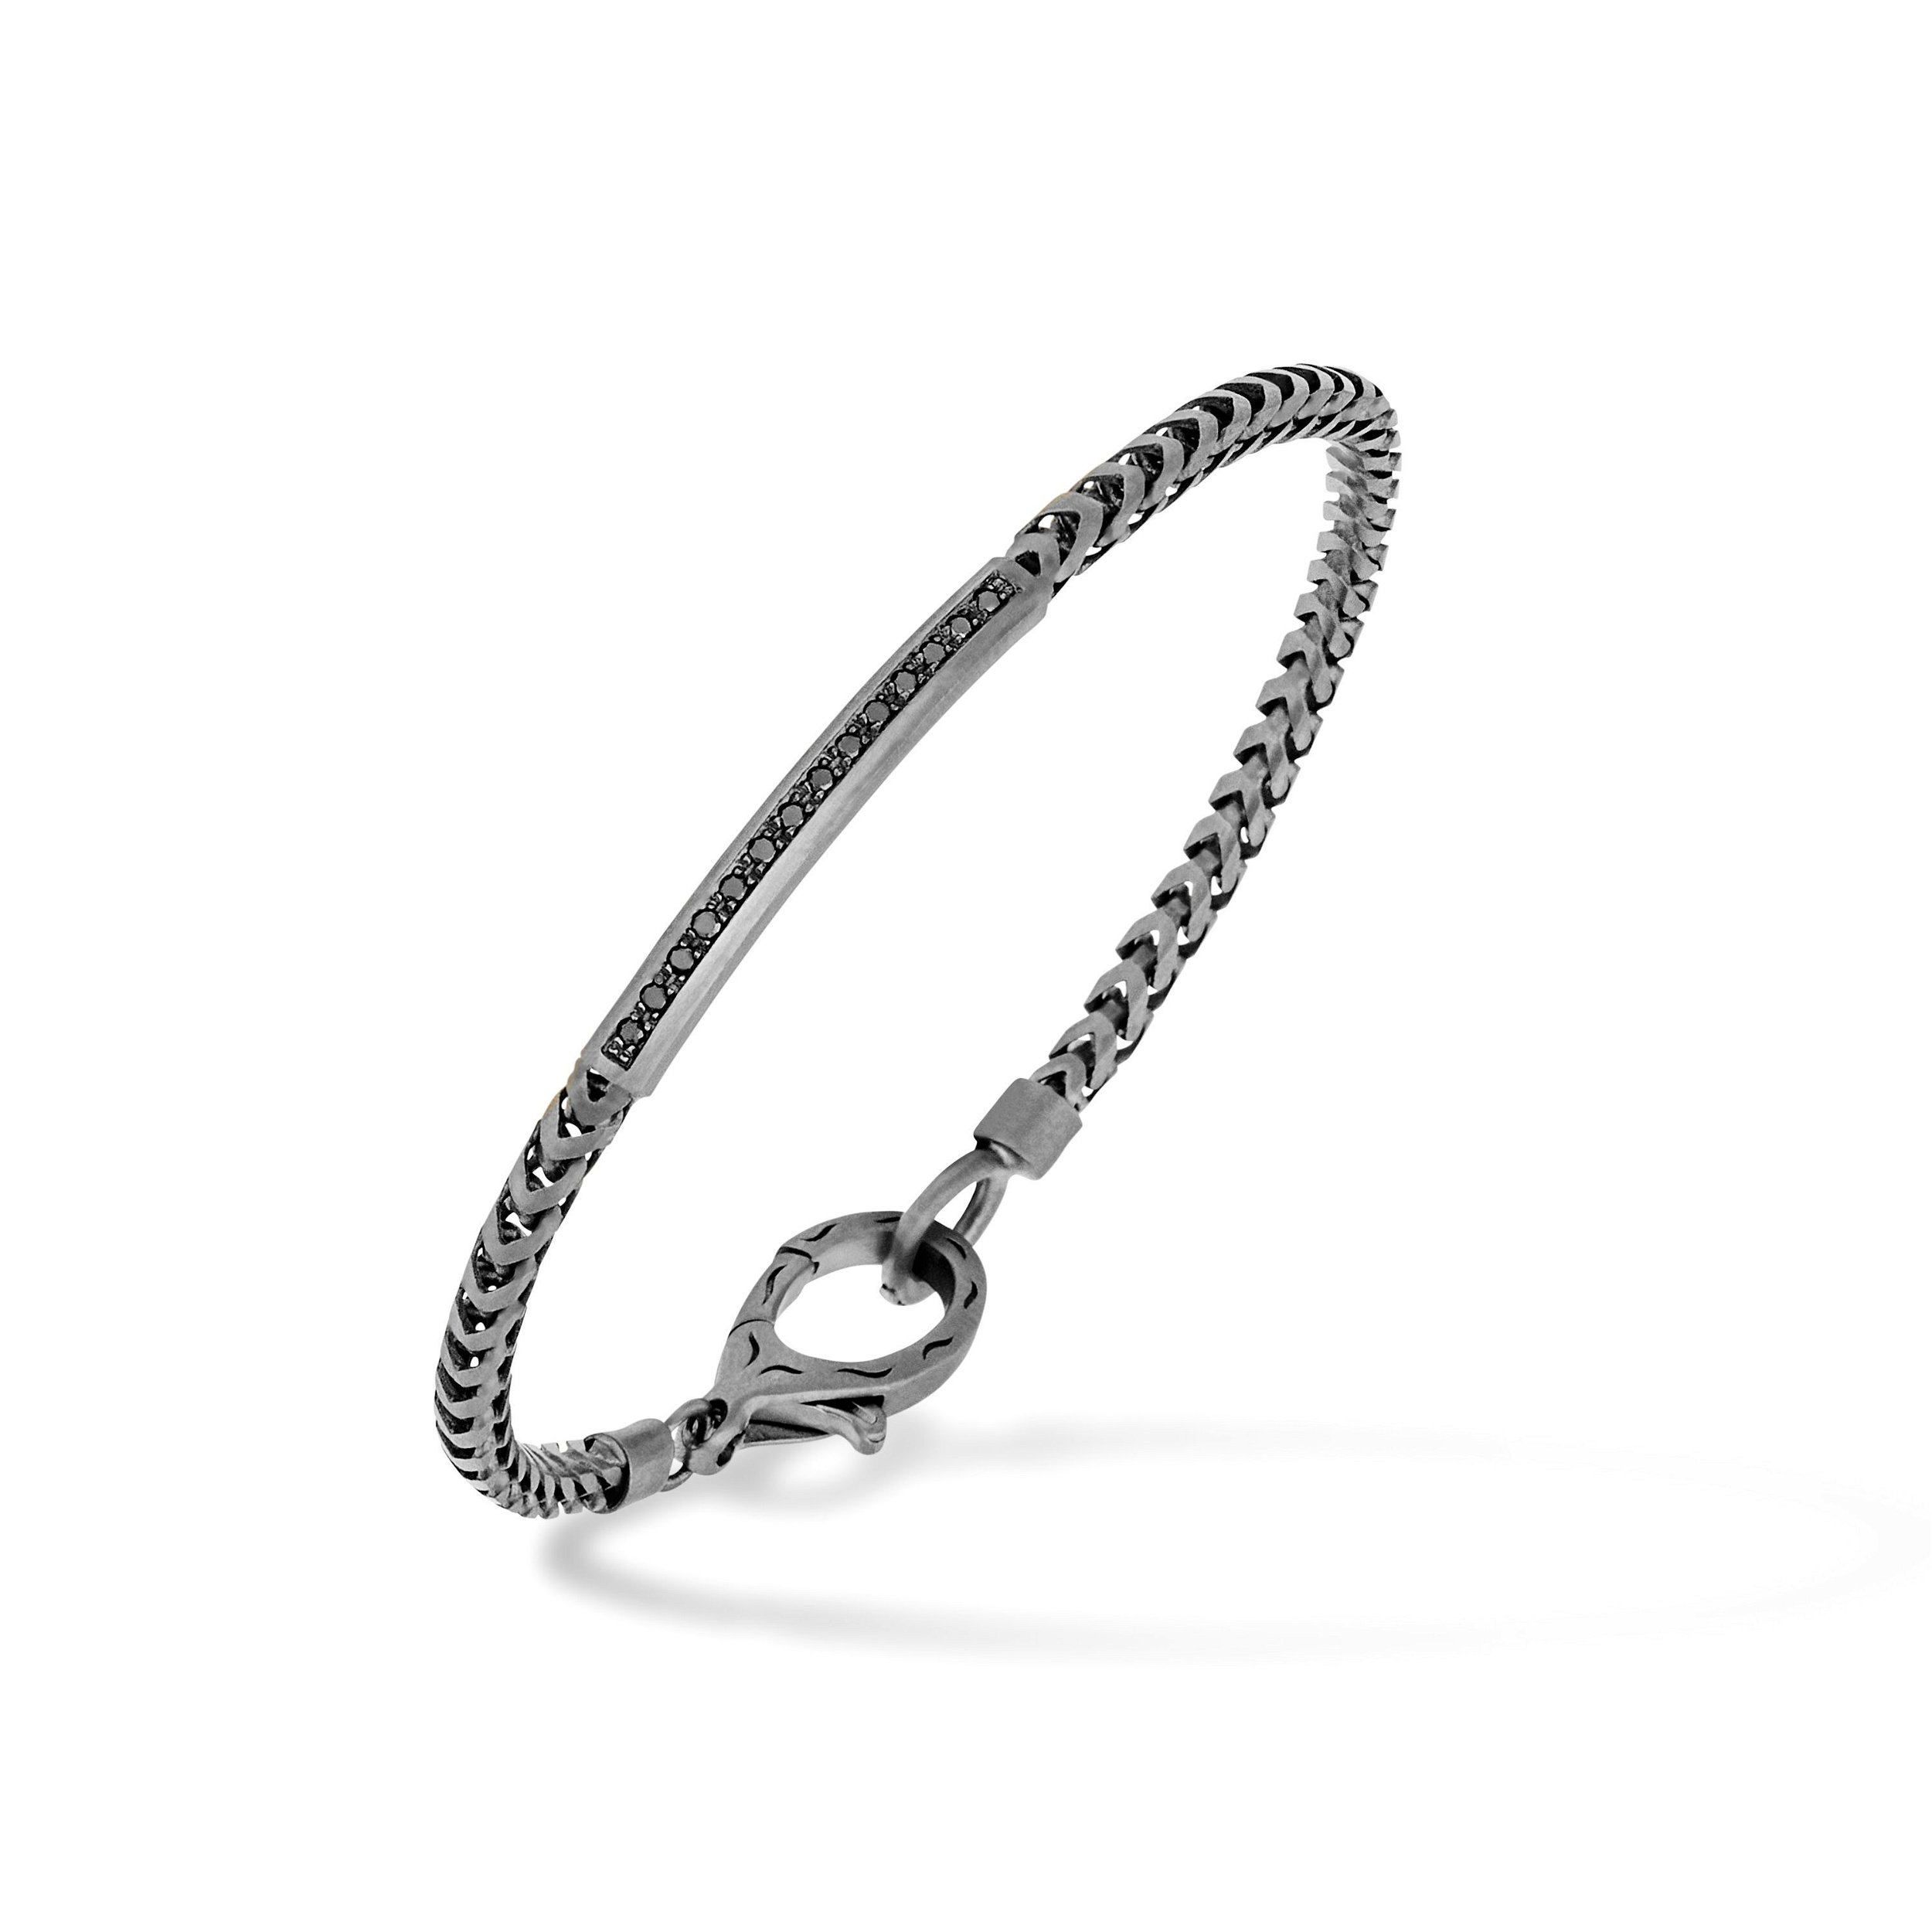 Ulysses ID Bracelet with Franco Chain Oxidized Sterling Silver and Black Diamonds